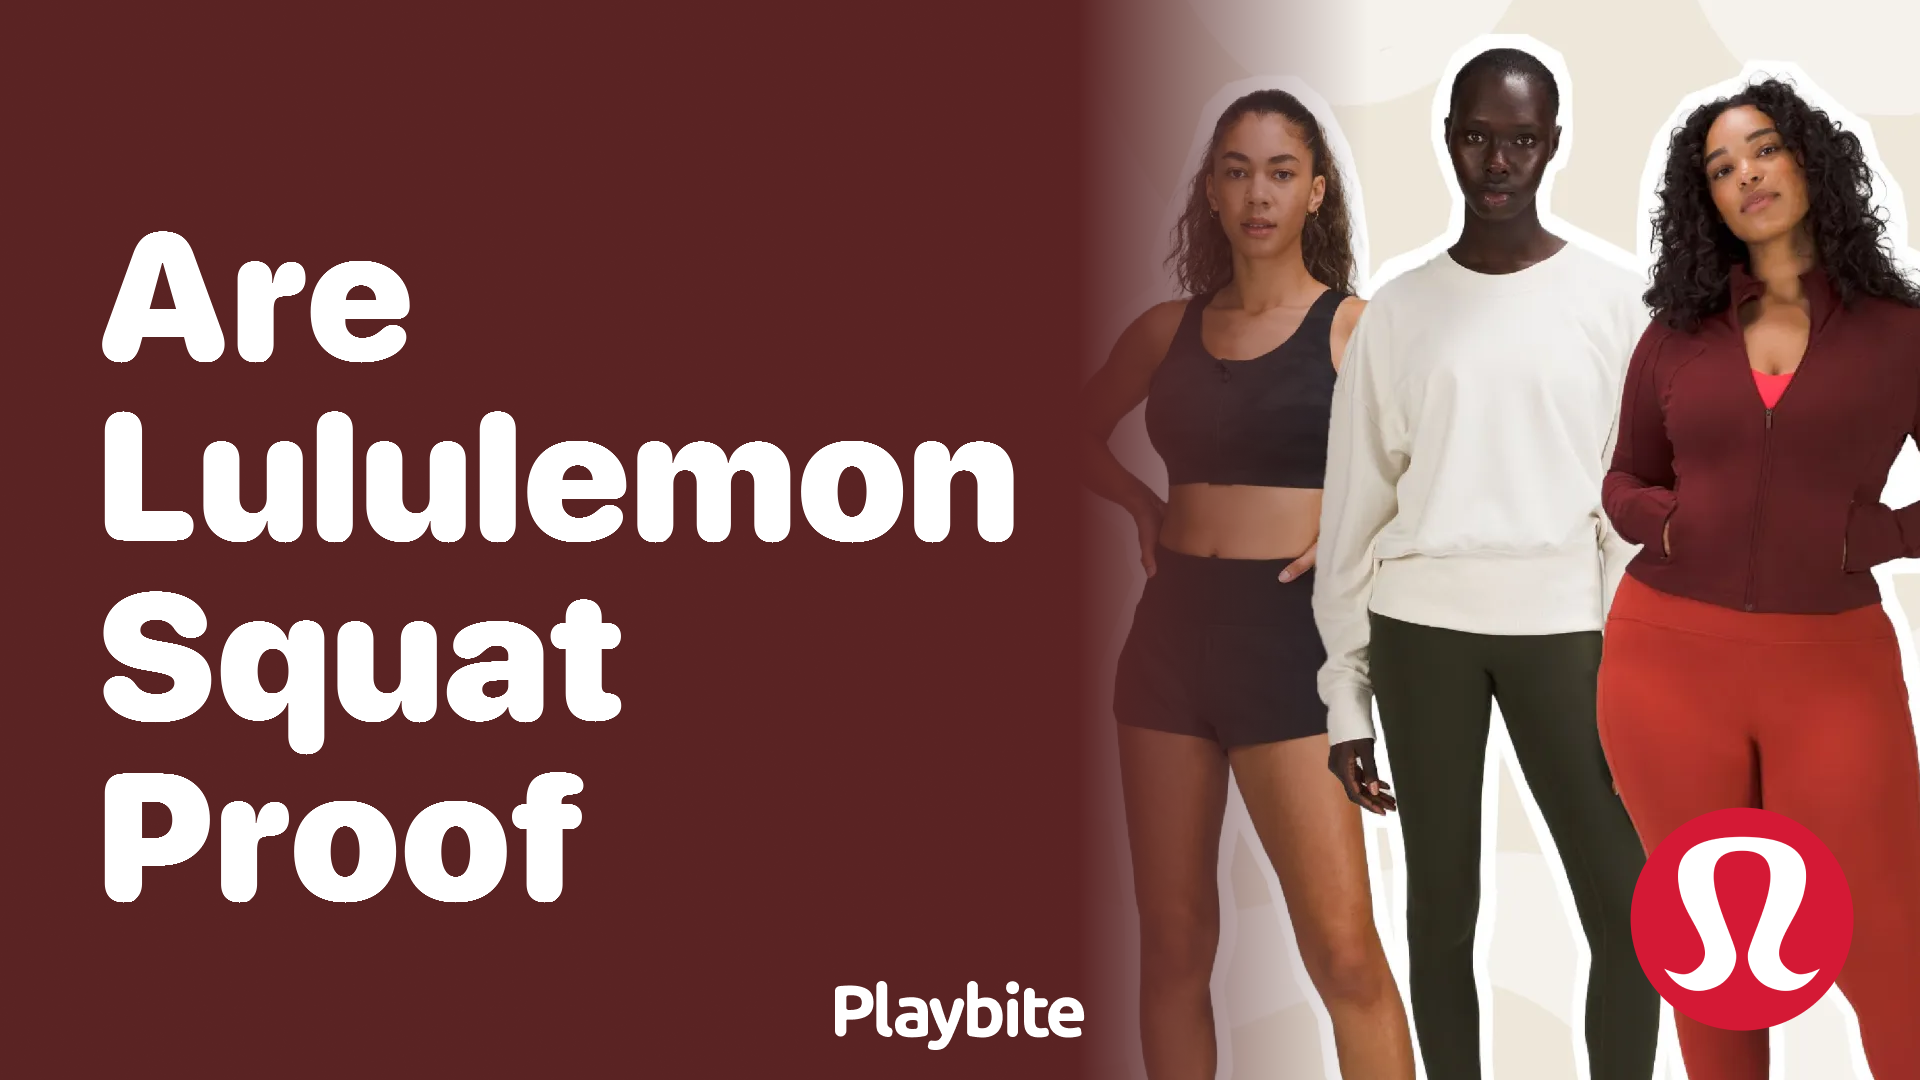 Are Lululemon Leggings Squat Proof? Let's Find Out! - Playbite